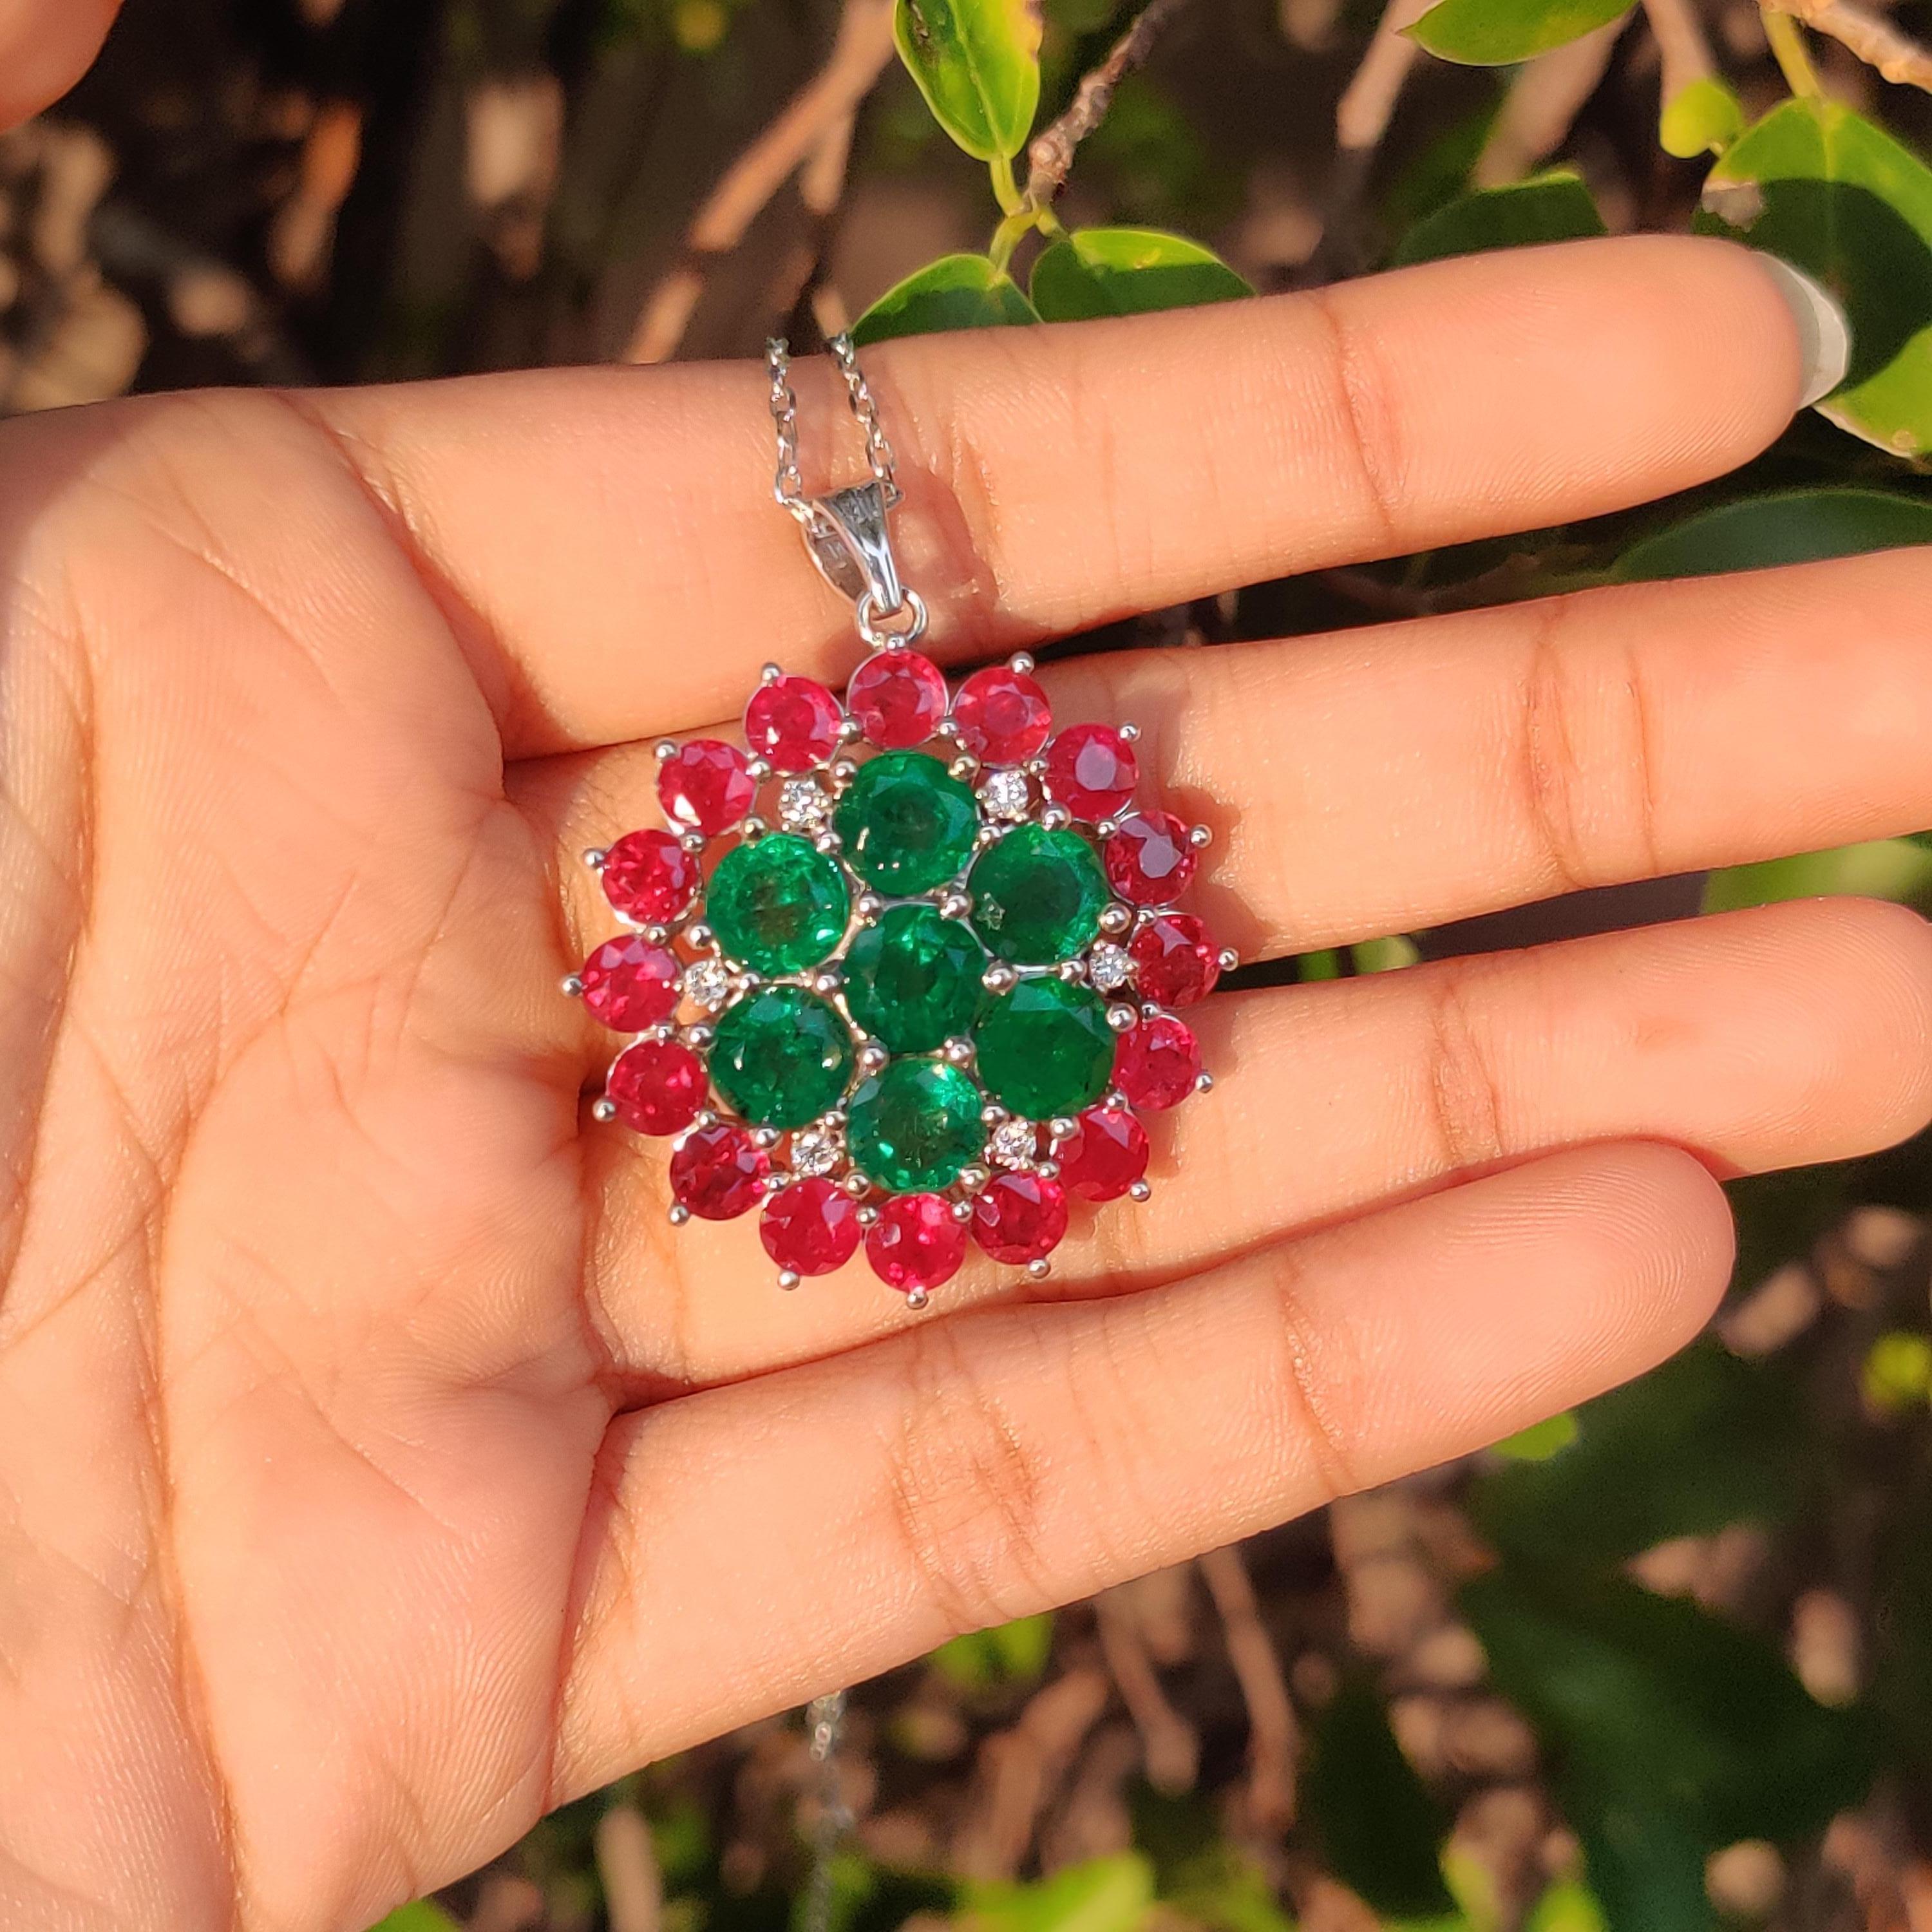 Introducing an extraordinary and enchanting pendant that captures attention with its bold and elegant flower-like design—meet the Emerald and Ruby Pendant! Crafted with utmost care, this exquisite piece is tailored for those who wish to express